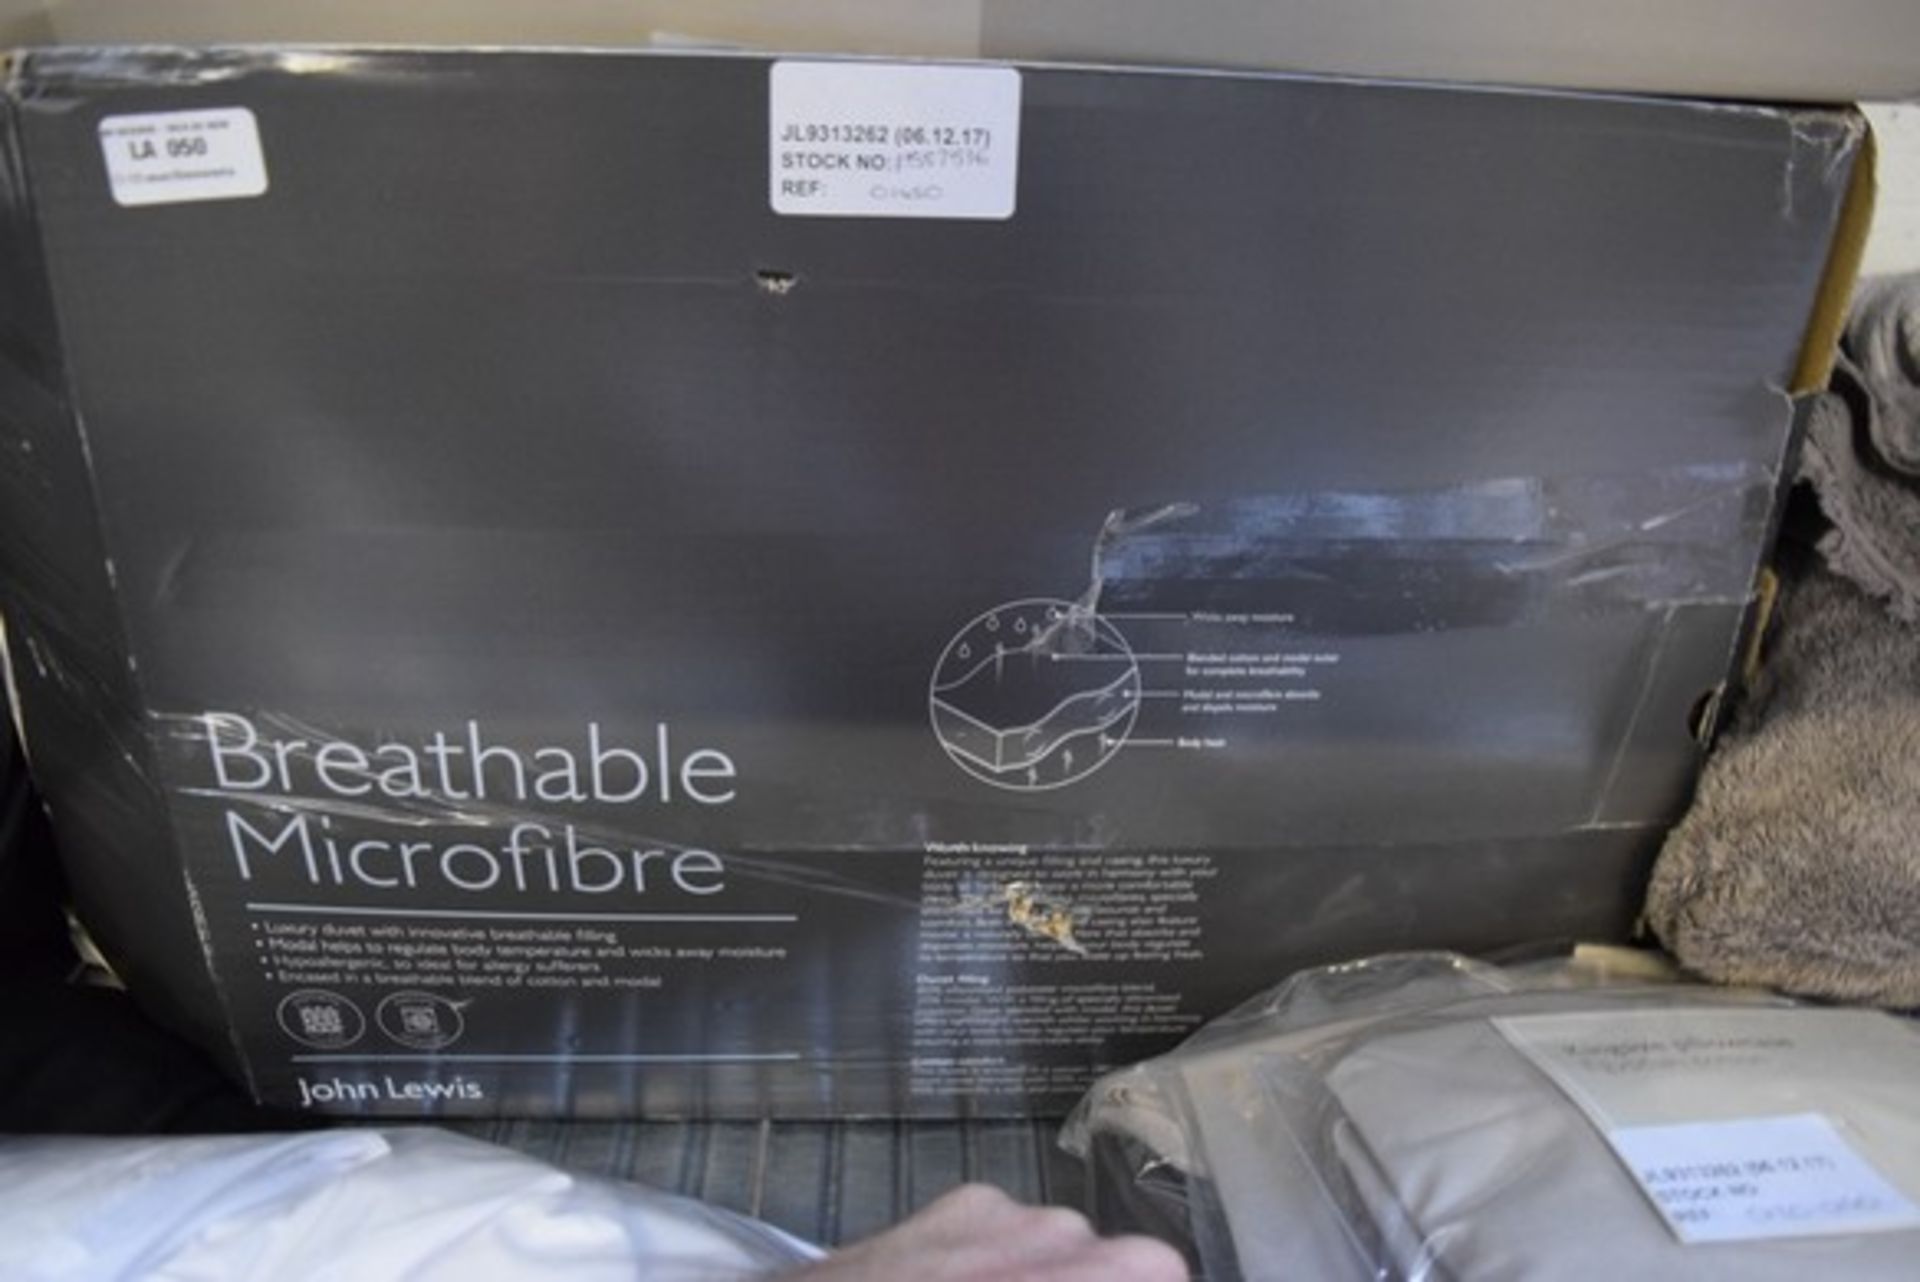 1 x BOXED BREATHABLE MICROFIBRE 4.5+9 TOG KING SIZE DUVET RRP £145 06.12.17 1587536 *PLEASE NOTE